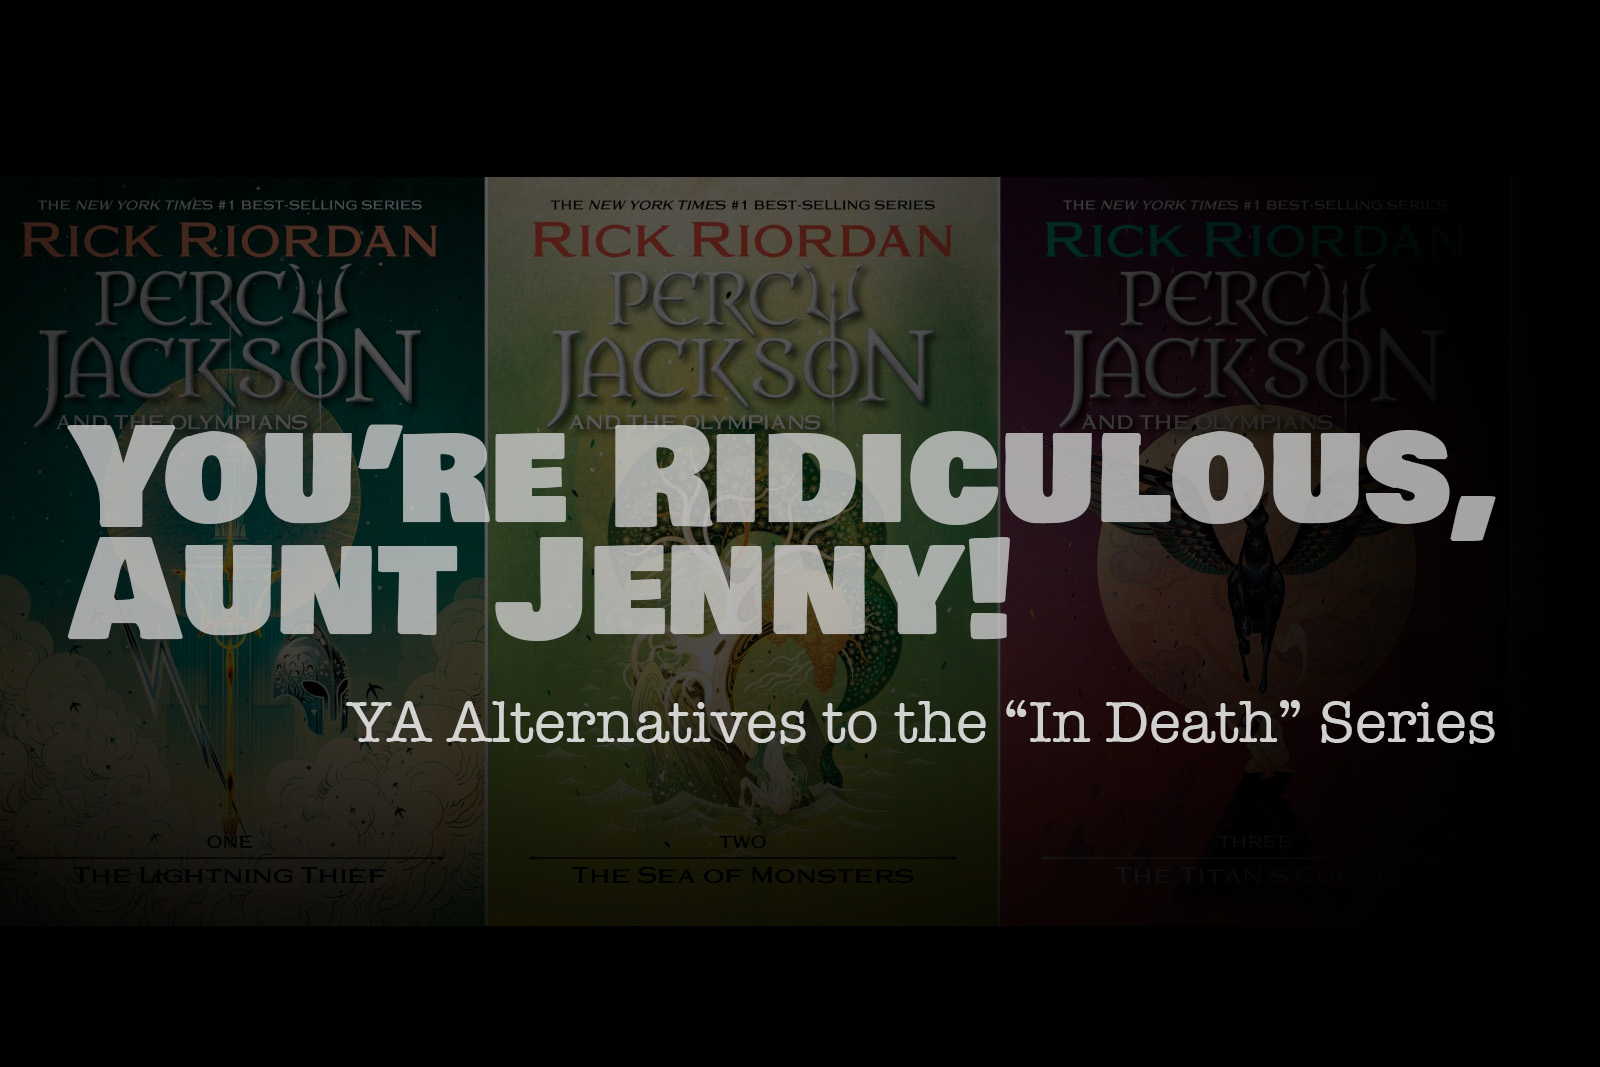 You’re Ridiculous, Aunt Jenny! YA Alternatives to “In Death”